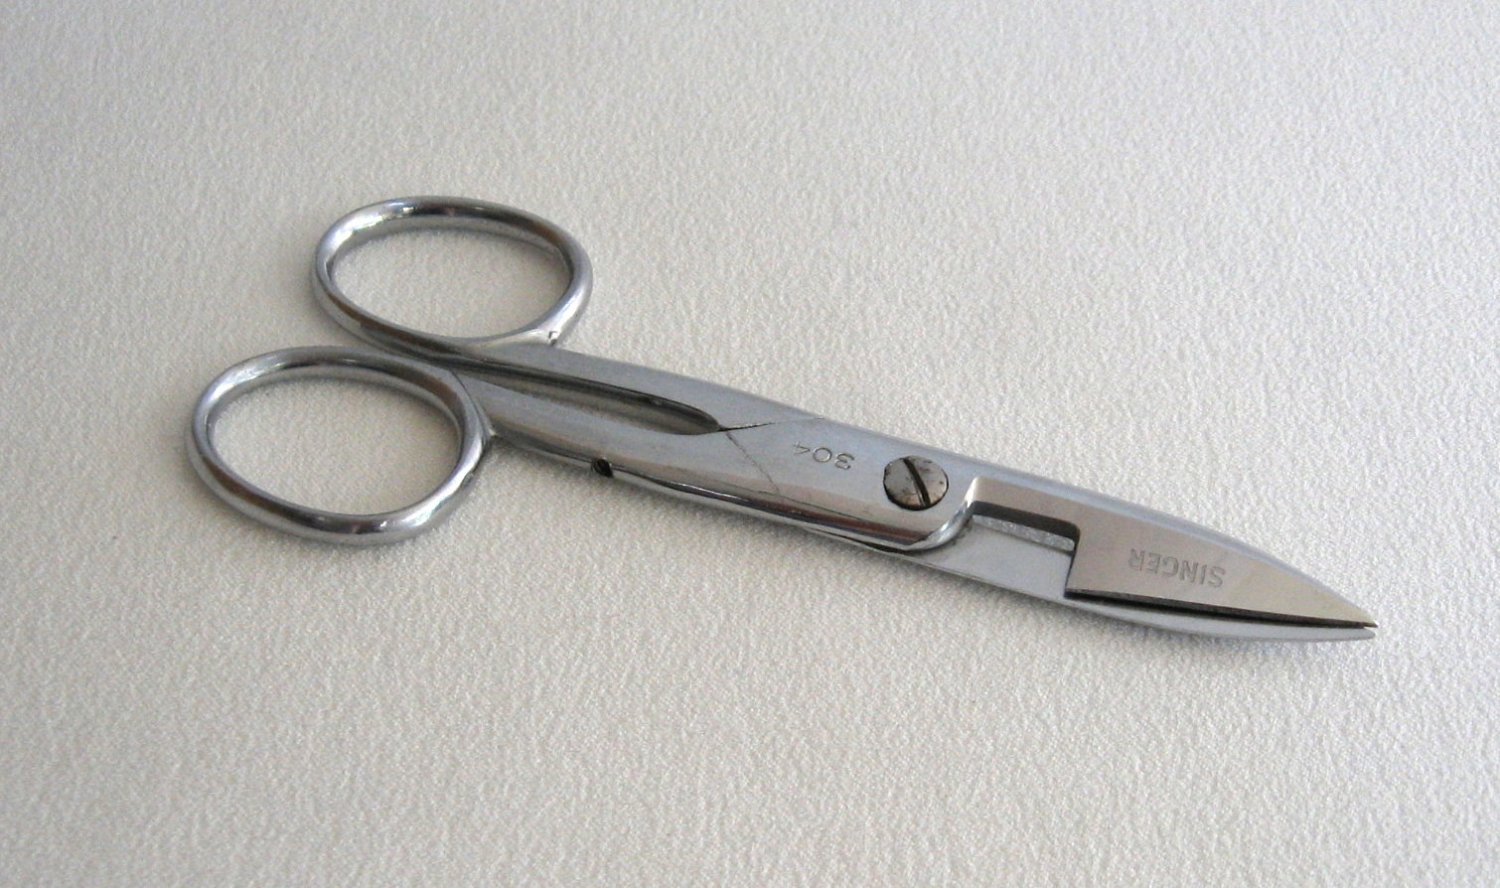 Button Hole Scissors By Singer 304 Made in Germany Vintage Shears